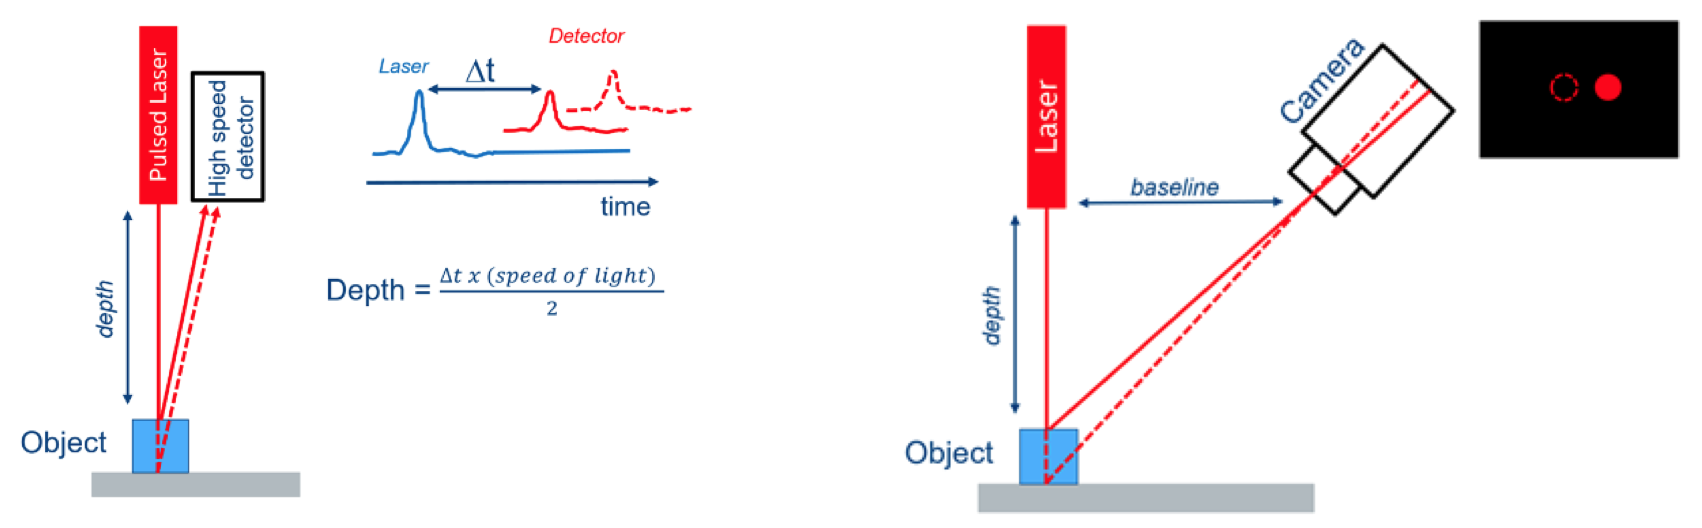 Figure 5 Left: Time-of-flight single-point laser range finder.  Measuring the time for a pulse to be transmitted, reflected and detected will reveal the distance to the object. Right: Laser range finder based on triangulation. As the object distance varies, so does the spot location on the sensor. In this case, the closer the object, the more the spot is displaced to the right on the sensor. Structured Light and Stereoscopic depth sensors rely on the same triangulation principles.